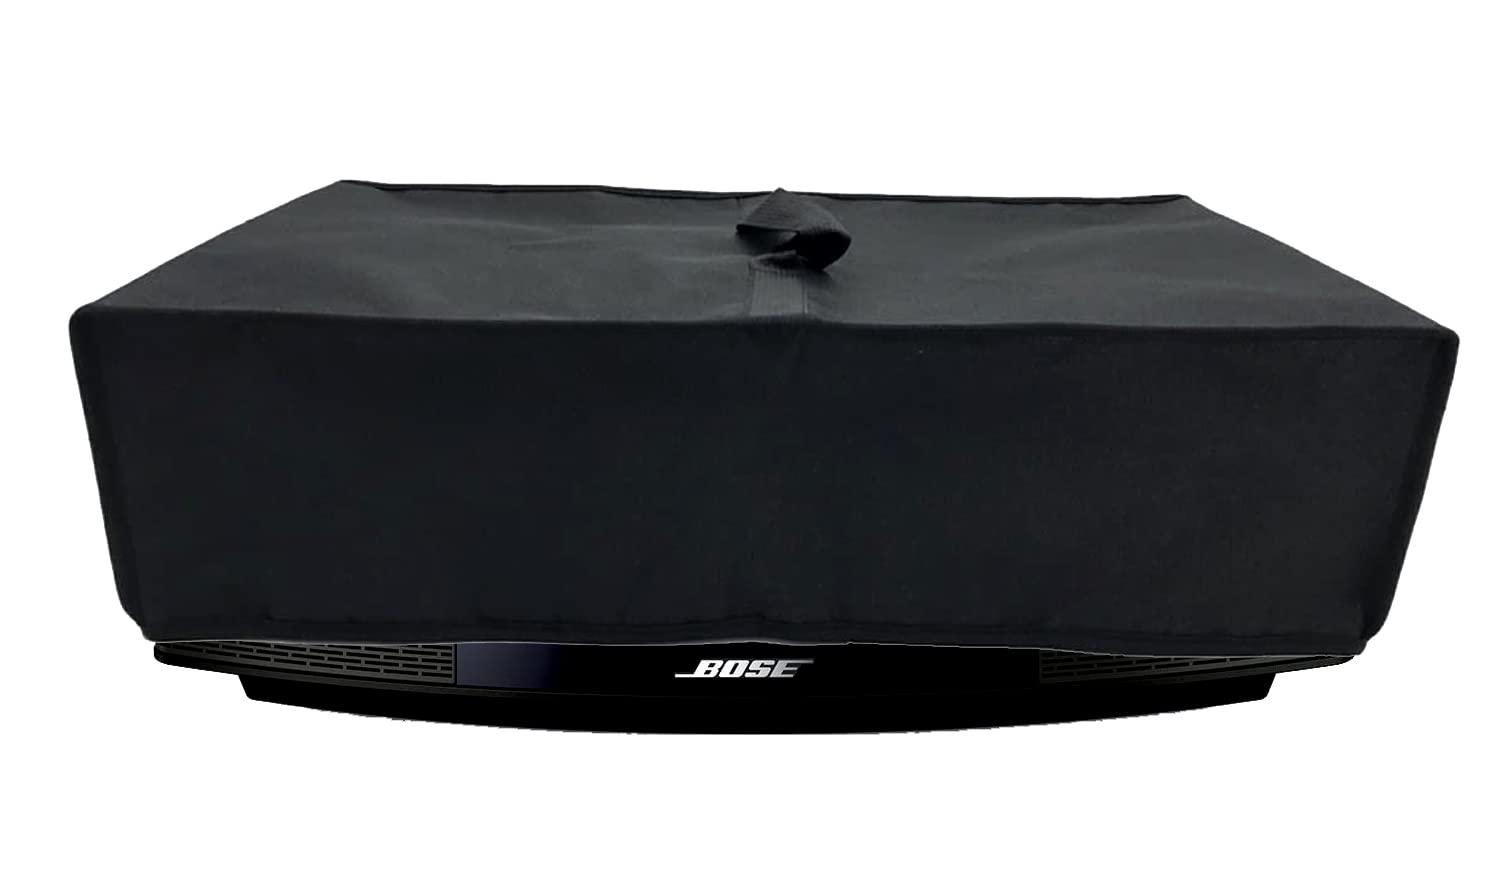 Wanty Black Antistatic Water-Proof Dust-Proof Nylon Fabric Printer Cover Case Protector for Bose Wave Music System IV